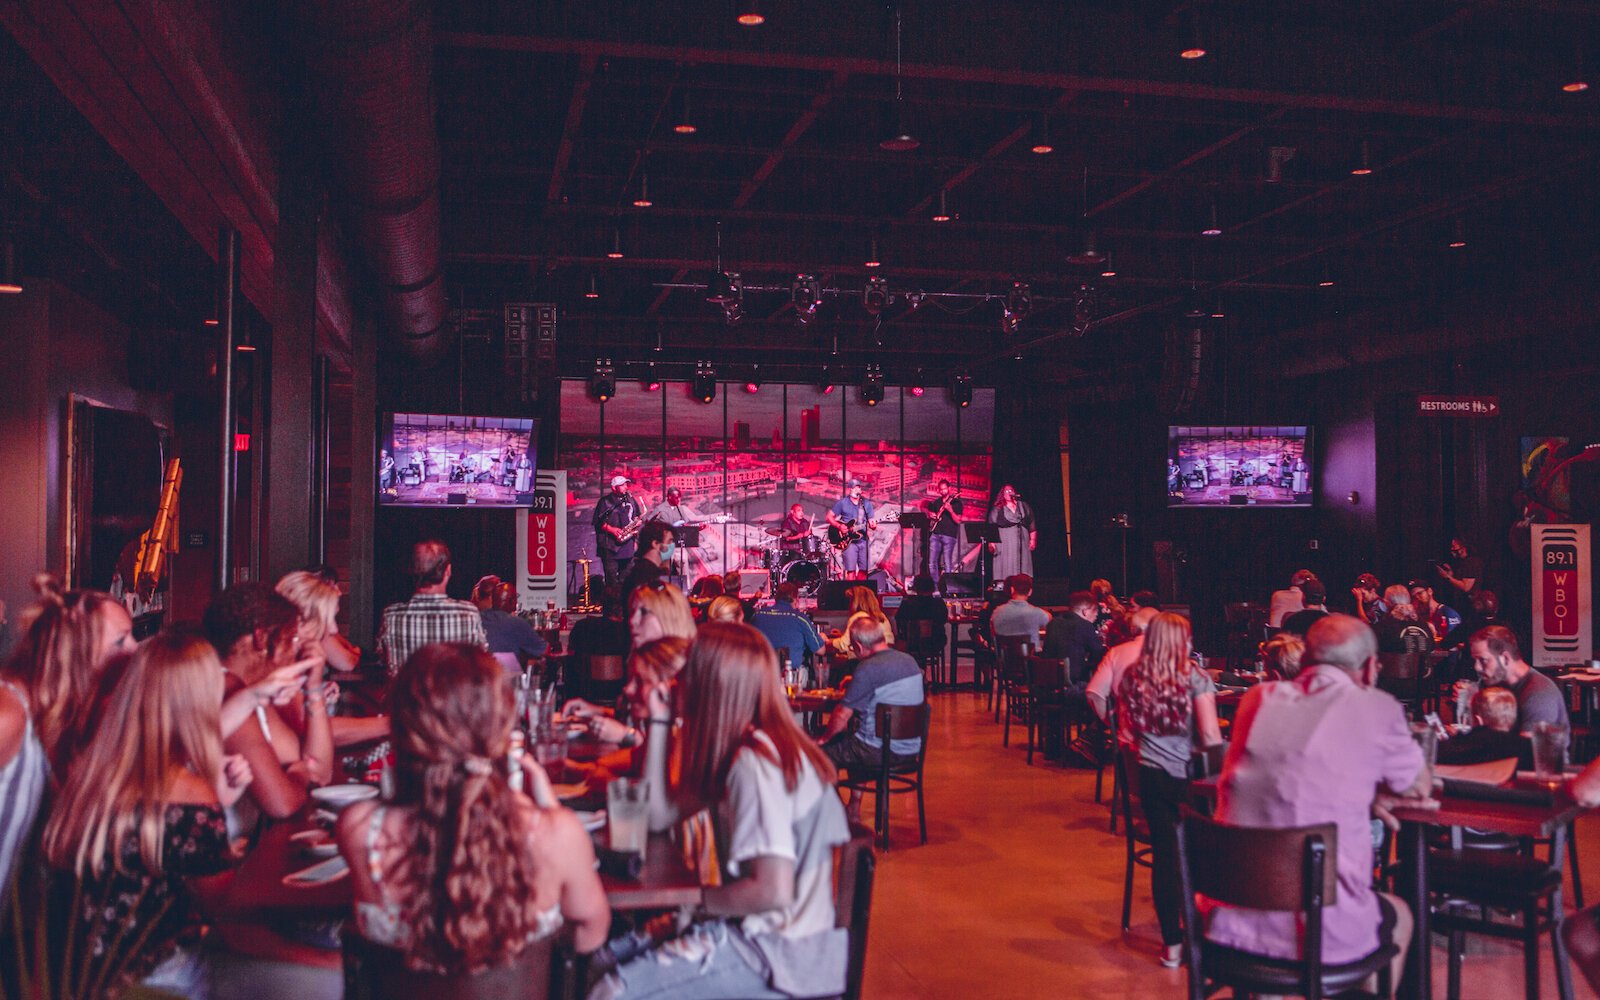 The Club Room at the Clyde hosts live music events six nights a week at Quimby Village.